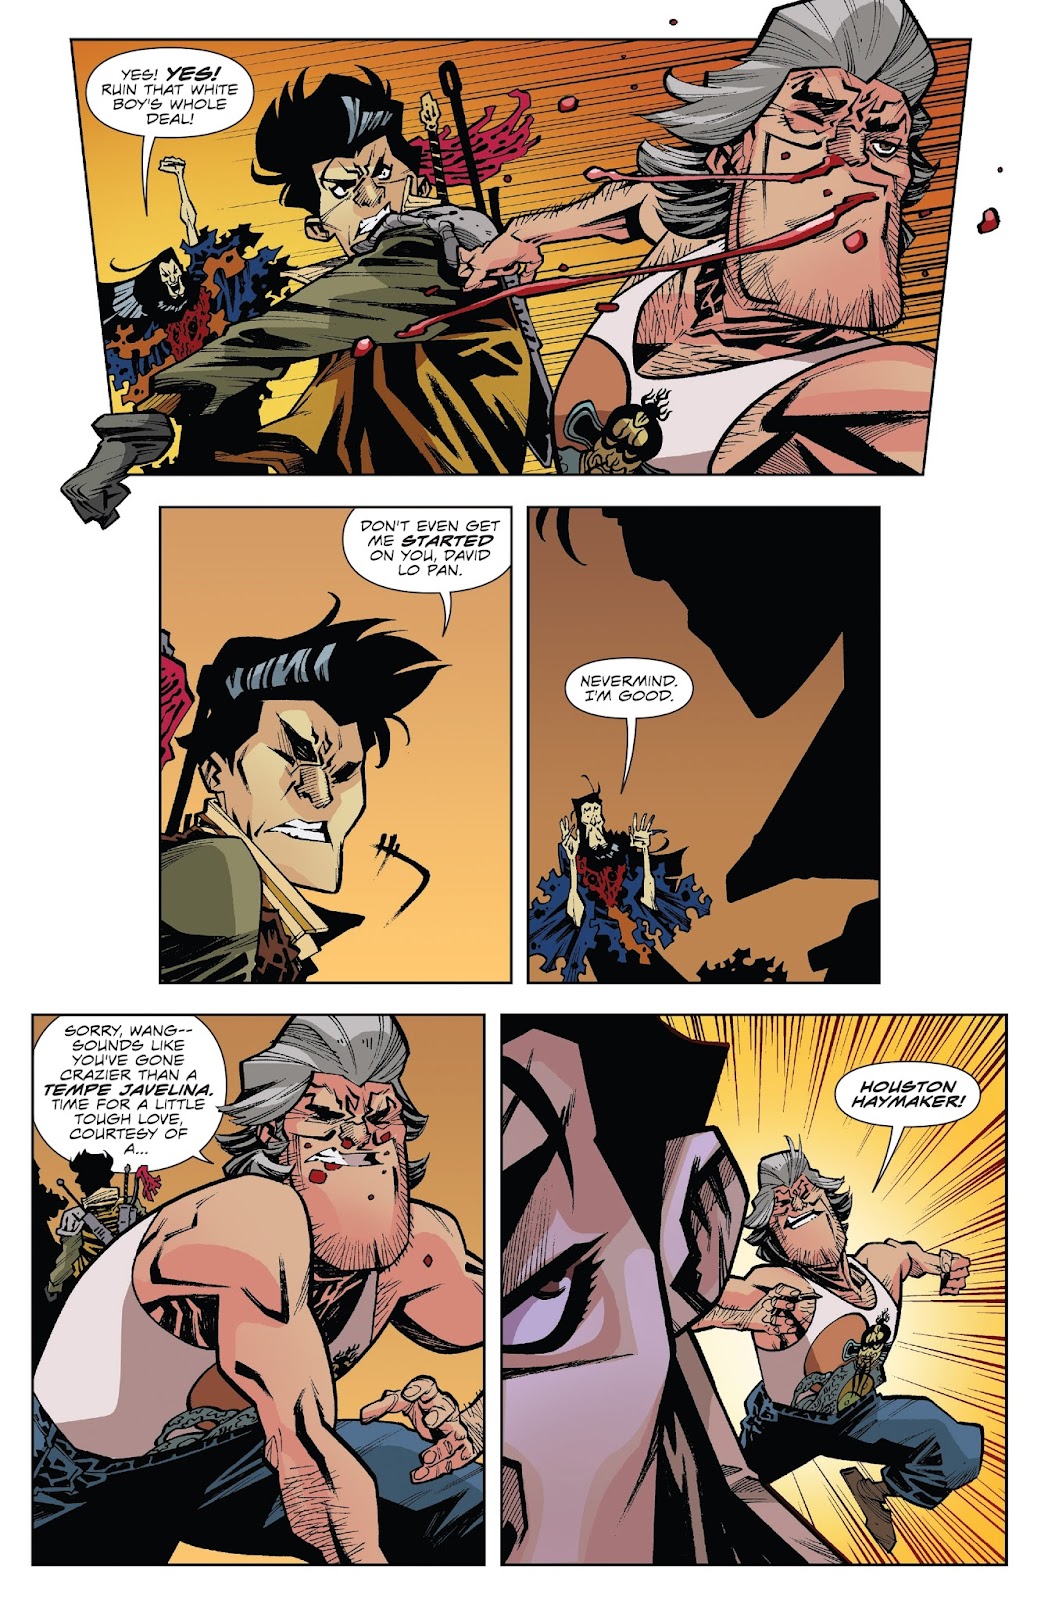 Big Trouble in Little China: Old Man Jack issue 4 - Page 13